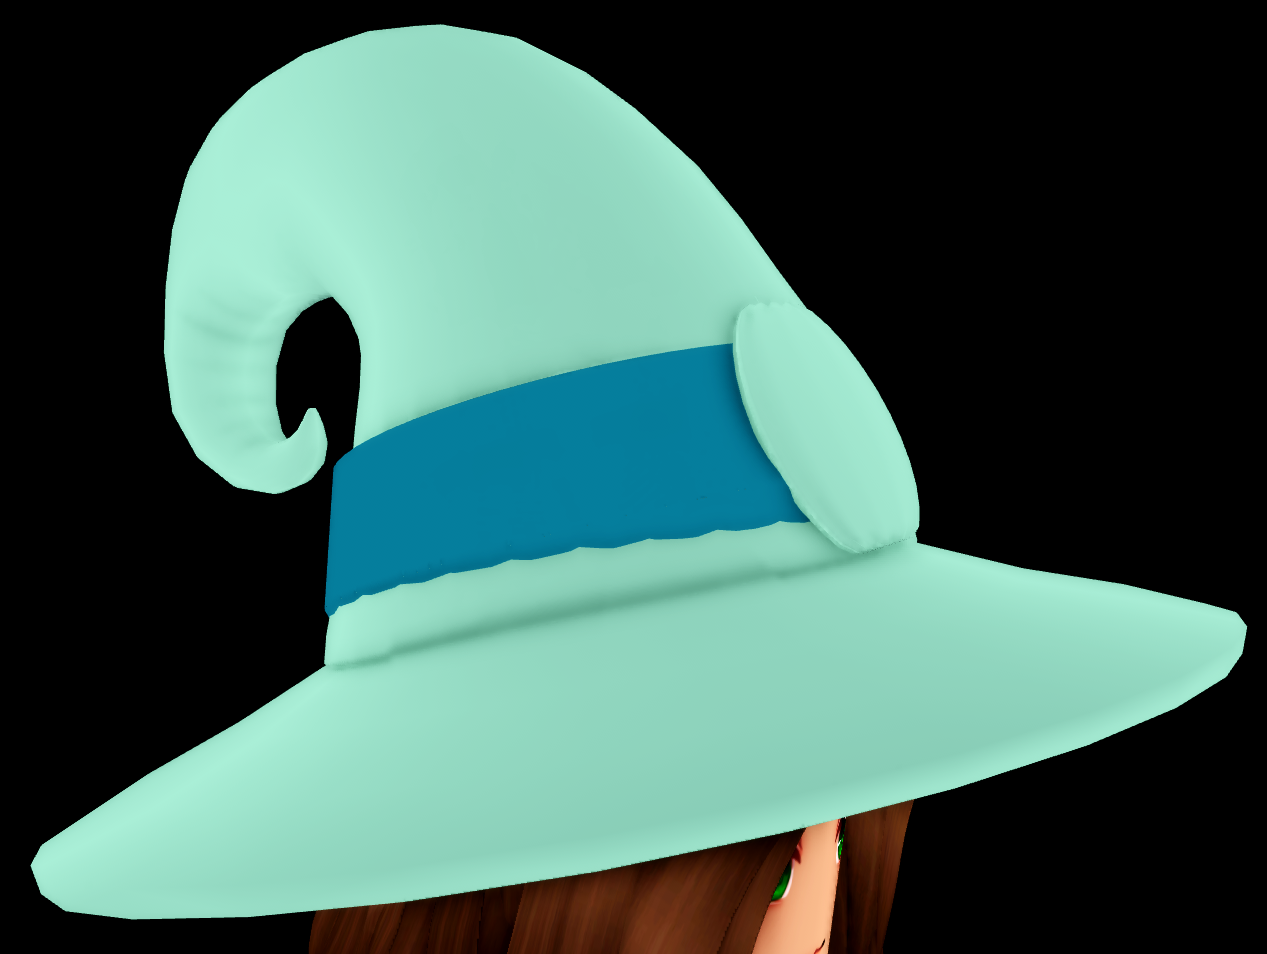 witch hat